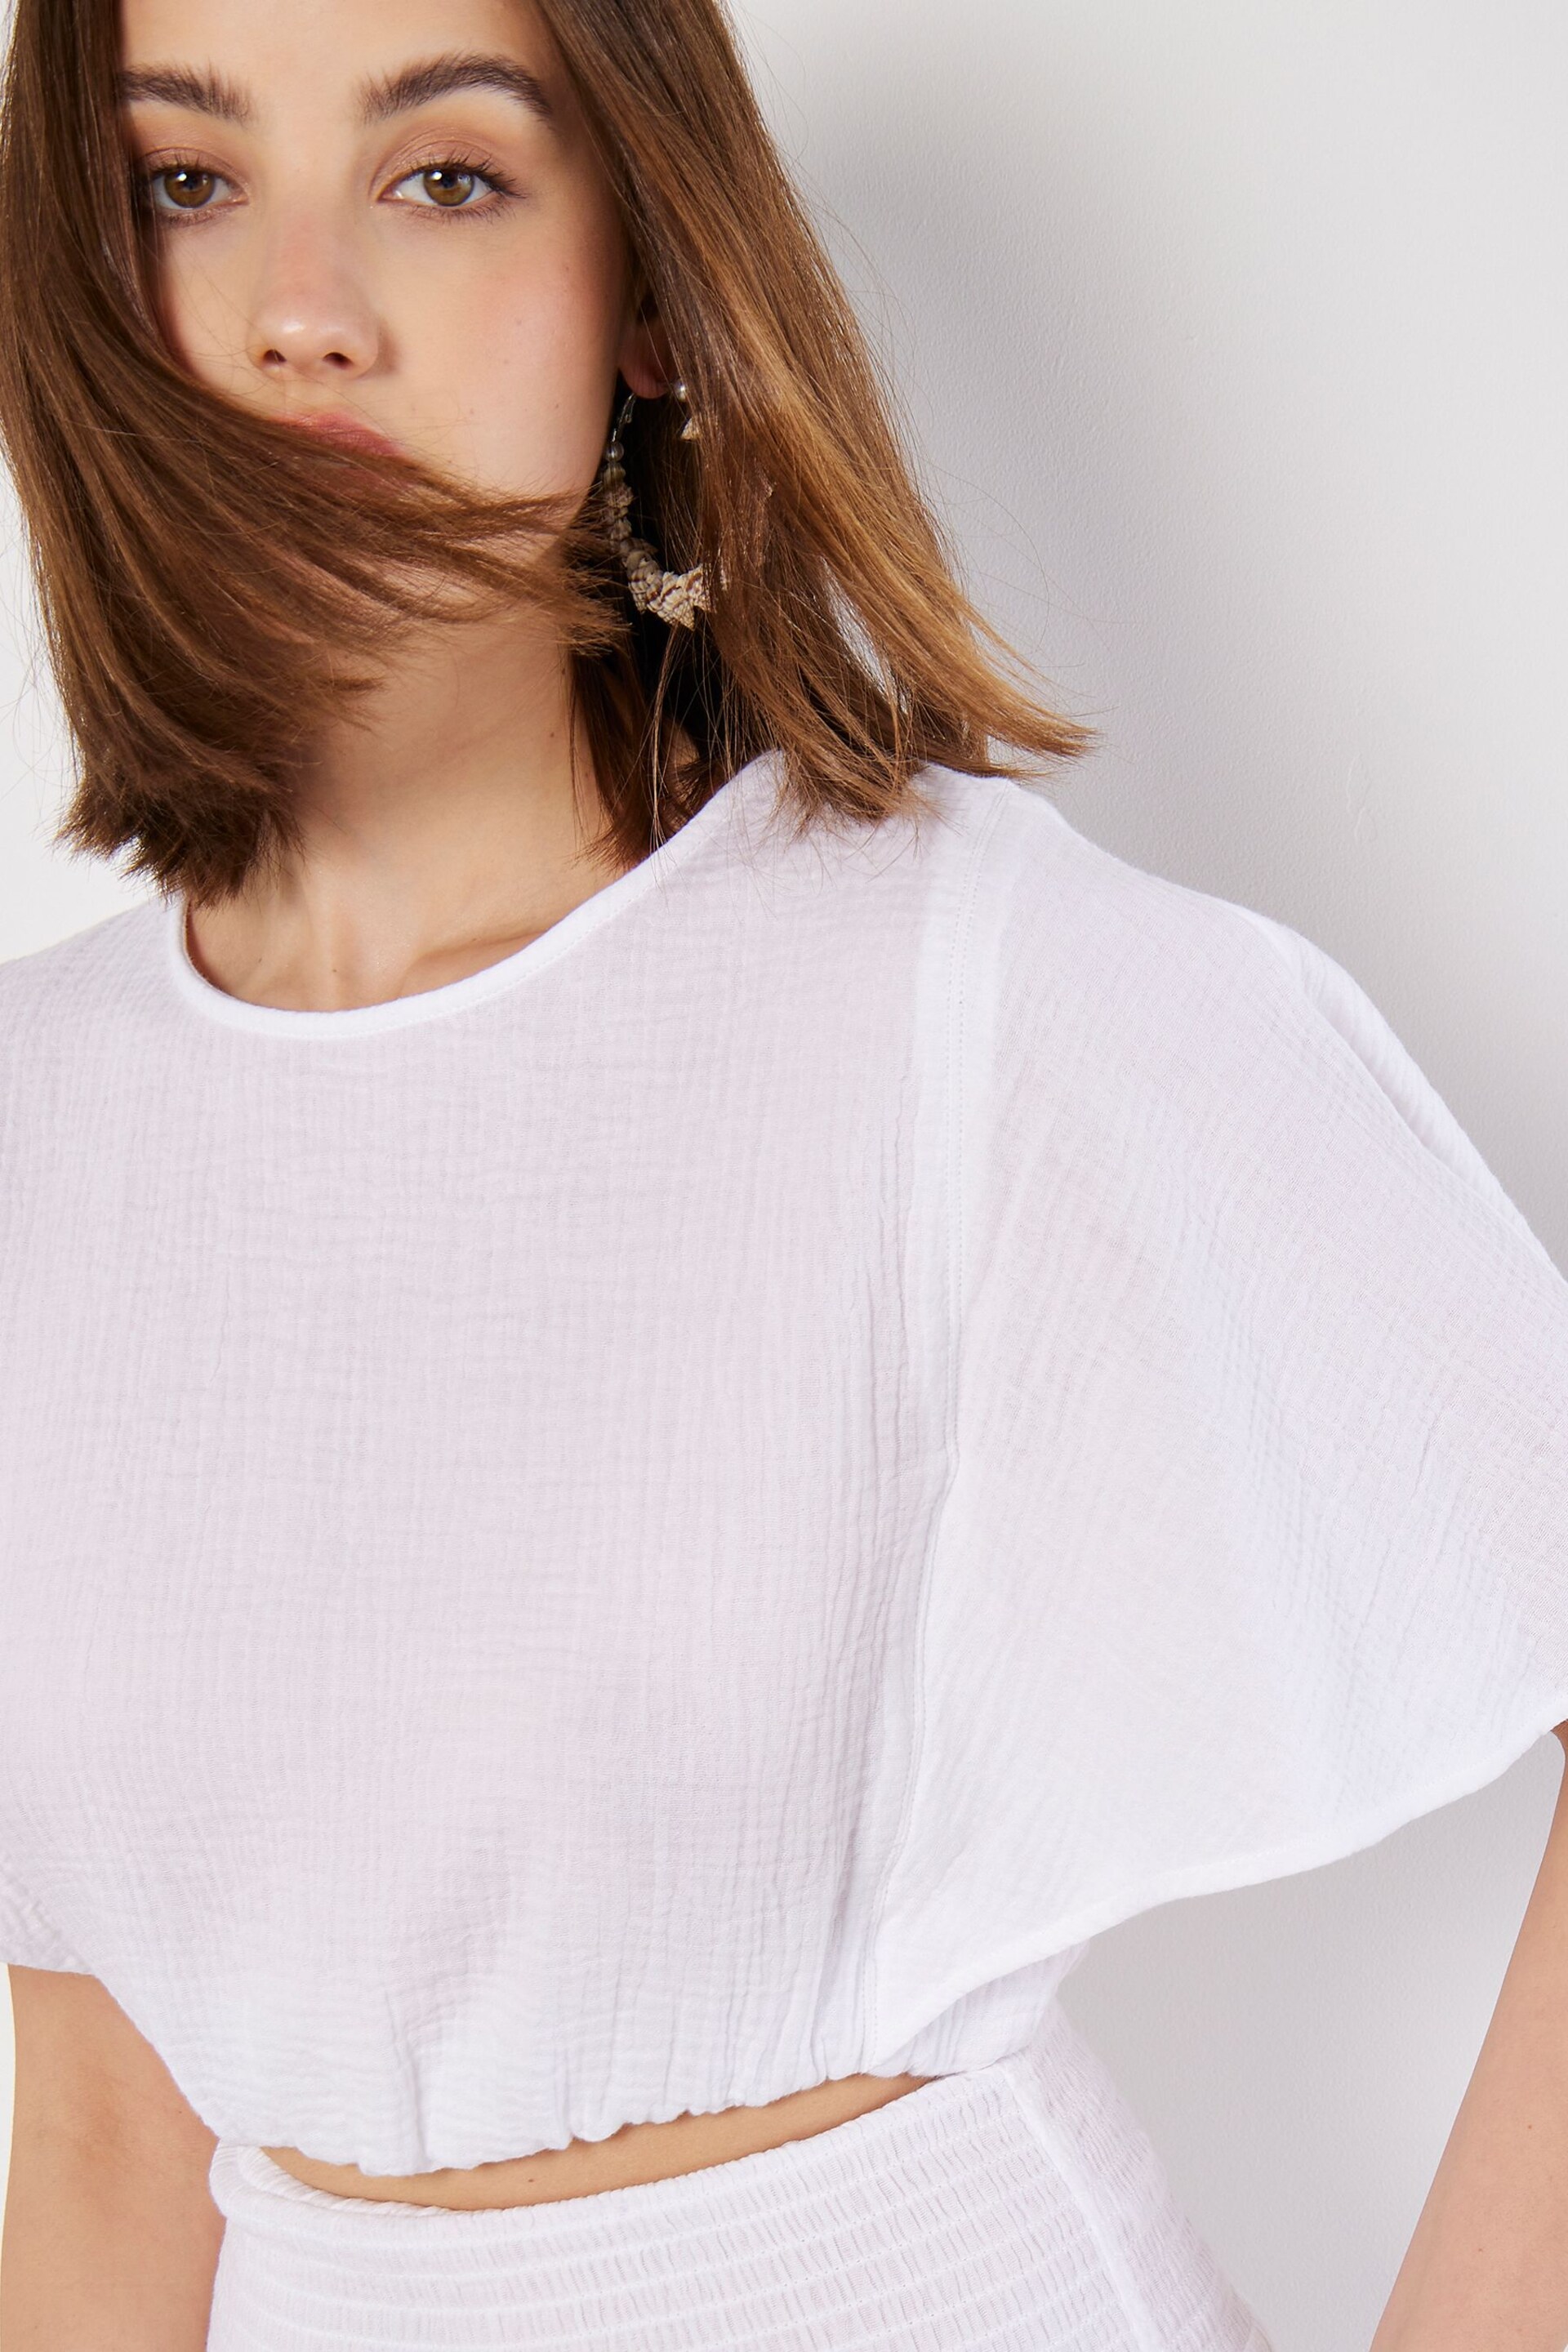 Apricot White Tetra Cotton Batwing Puff Top - Image 1 of 4